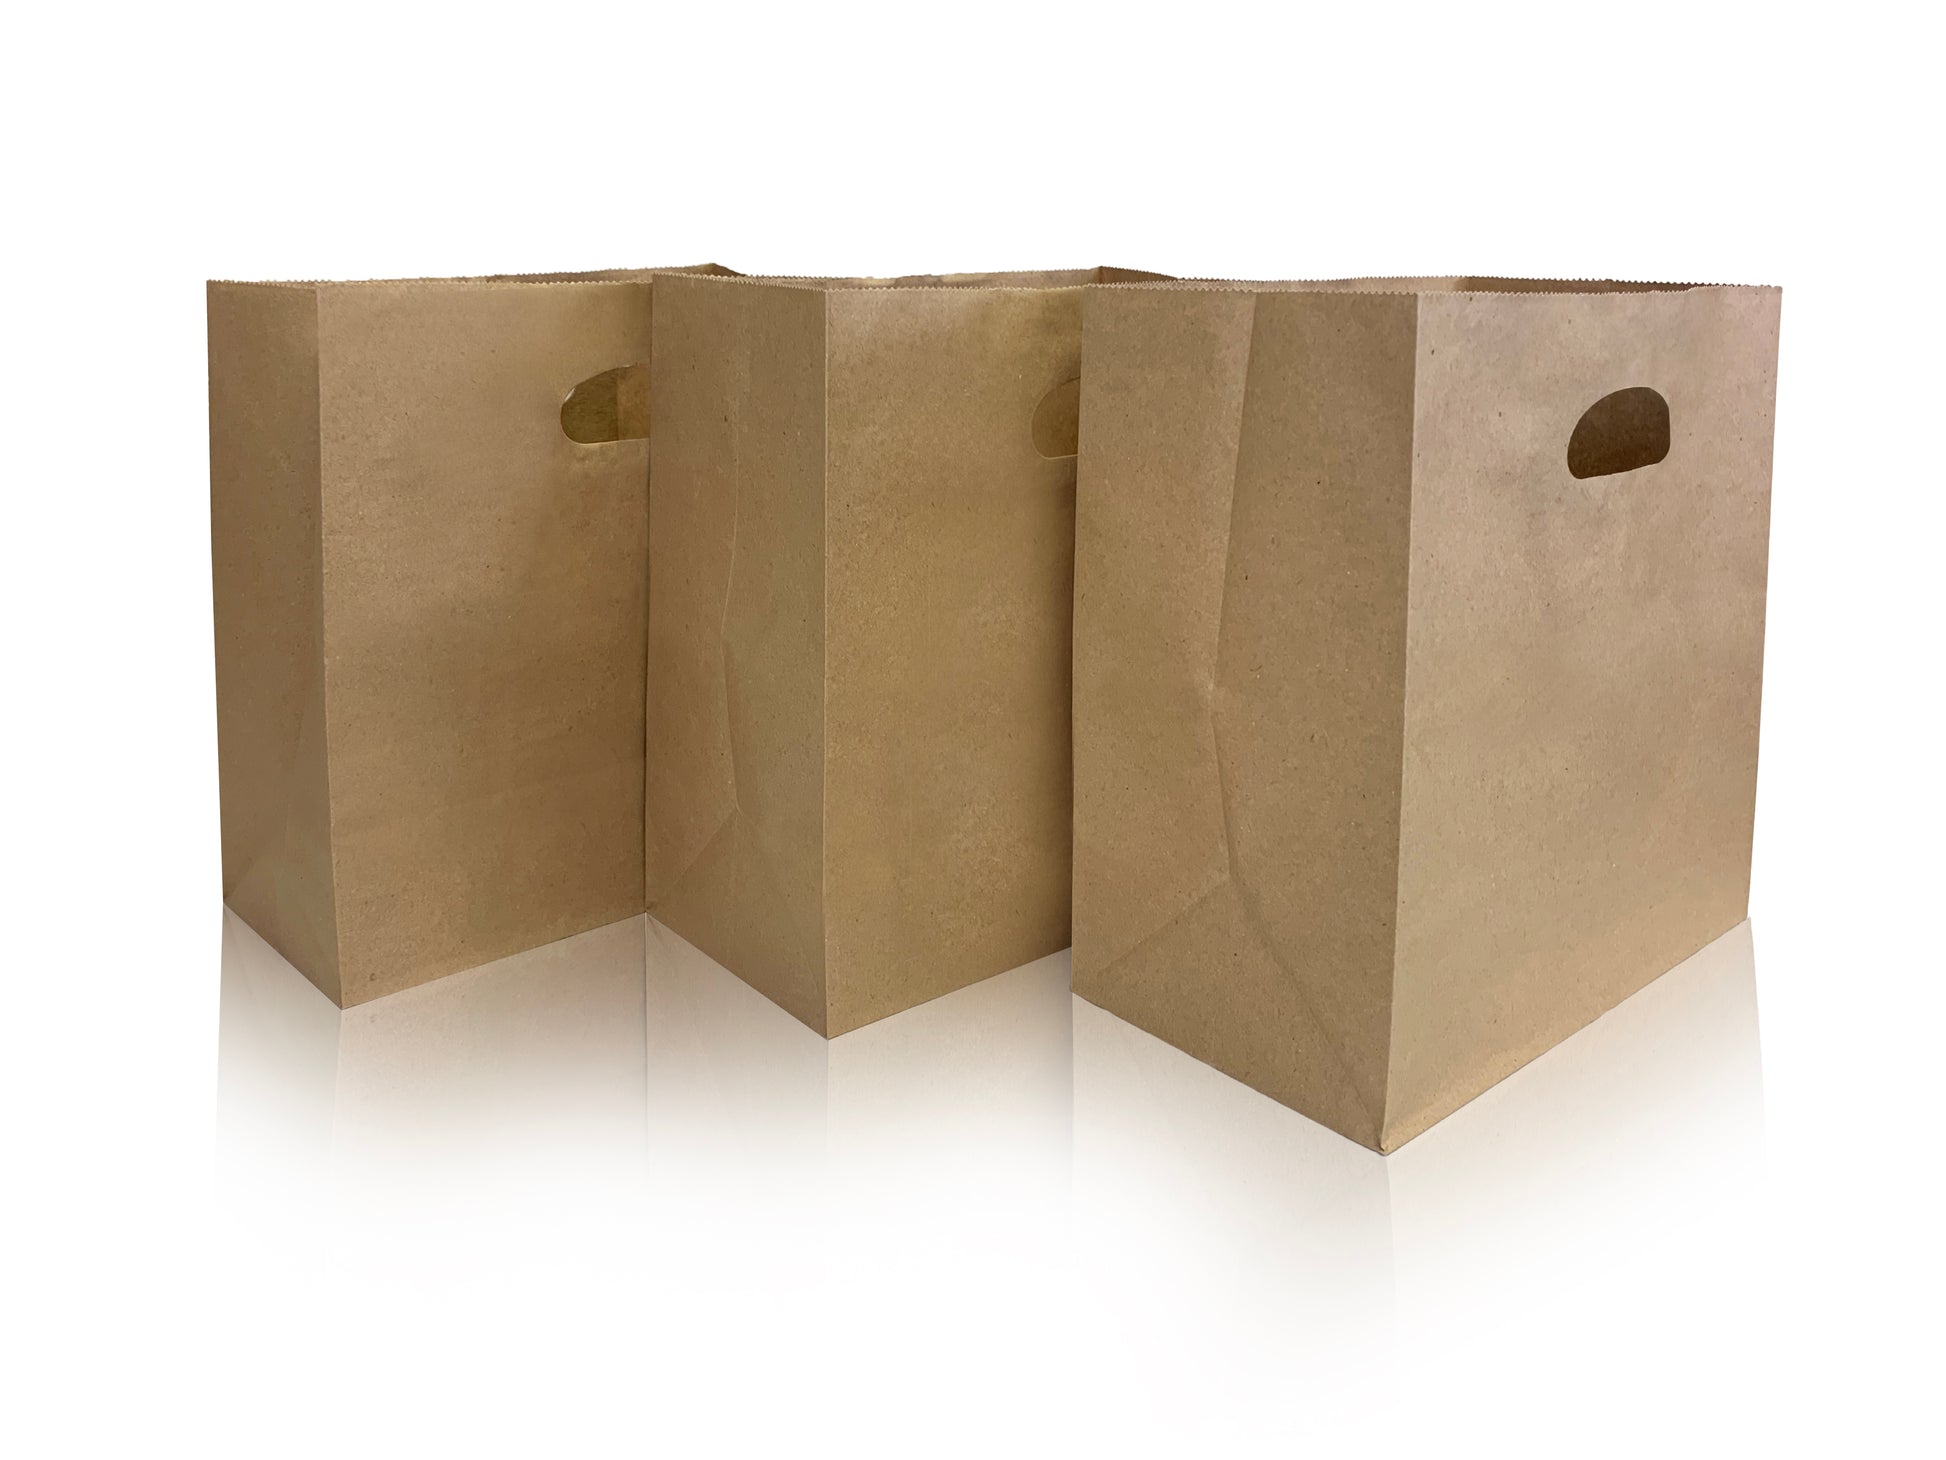 400 Pcs, Anna, 11x6x11 inches, Kraft Paper Bags, with Twisted Handle